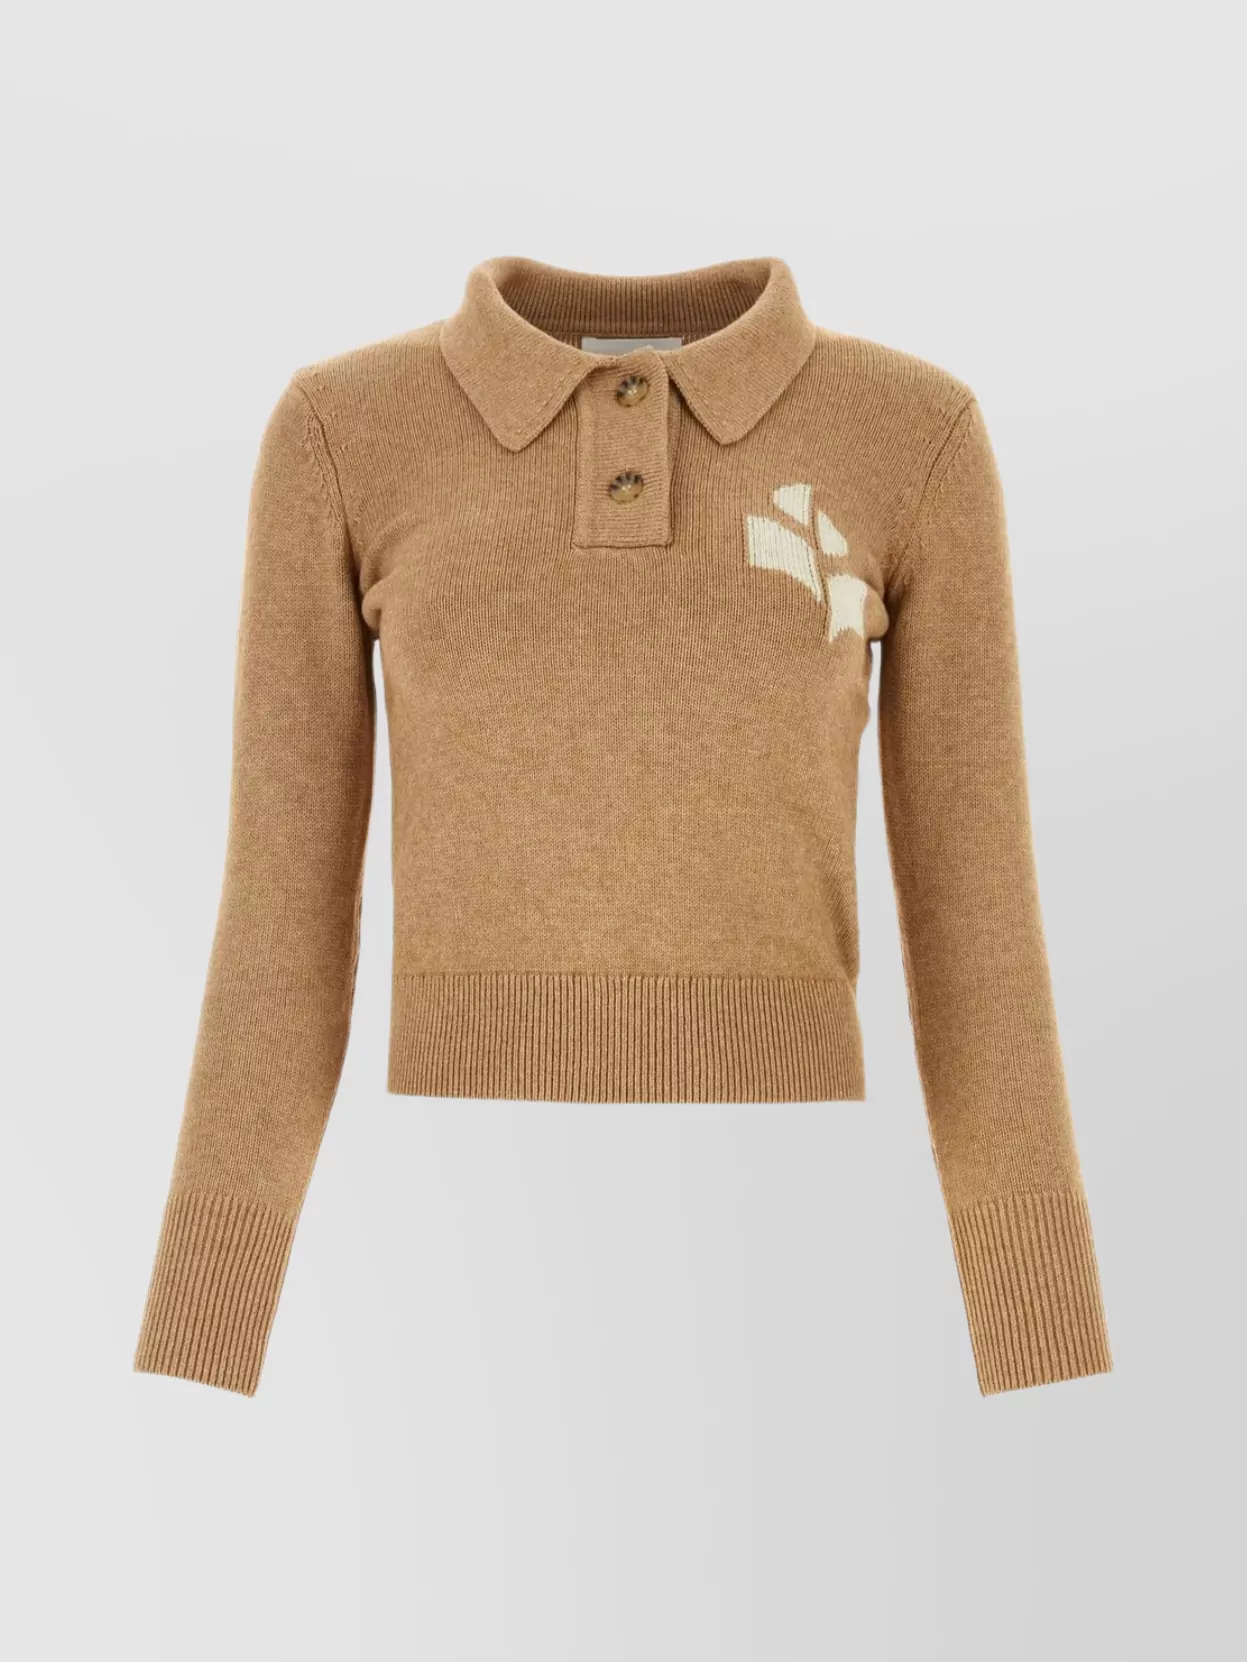 Shop Isabel Marant Étoile Turtleneck Knitwear: Nola Polo With Ribbed Cuffs And Buttoned Collar